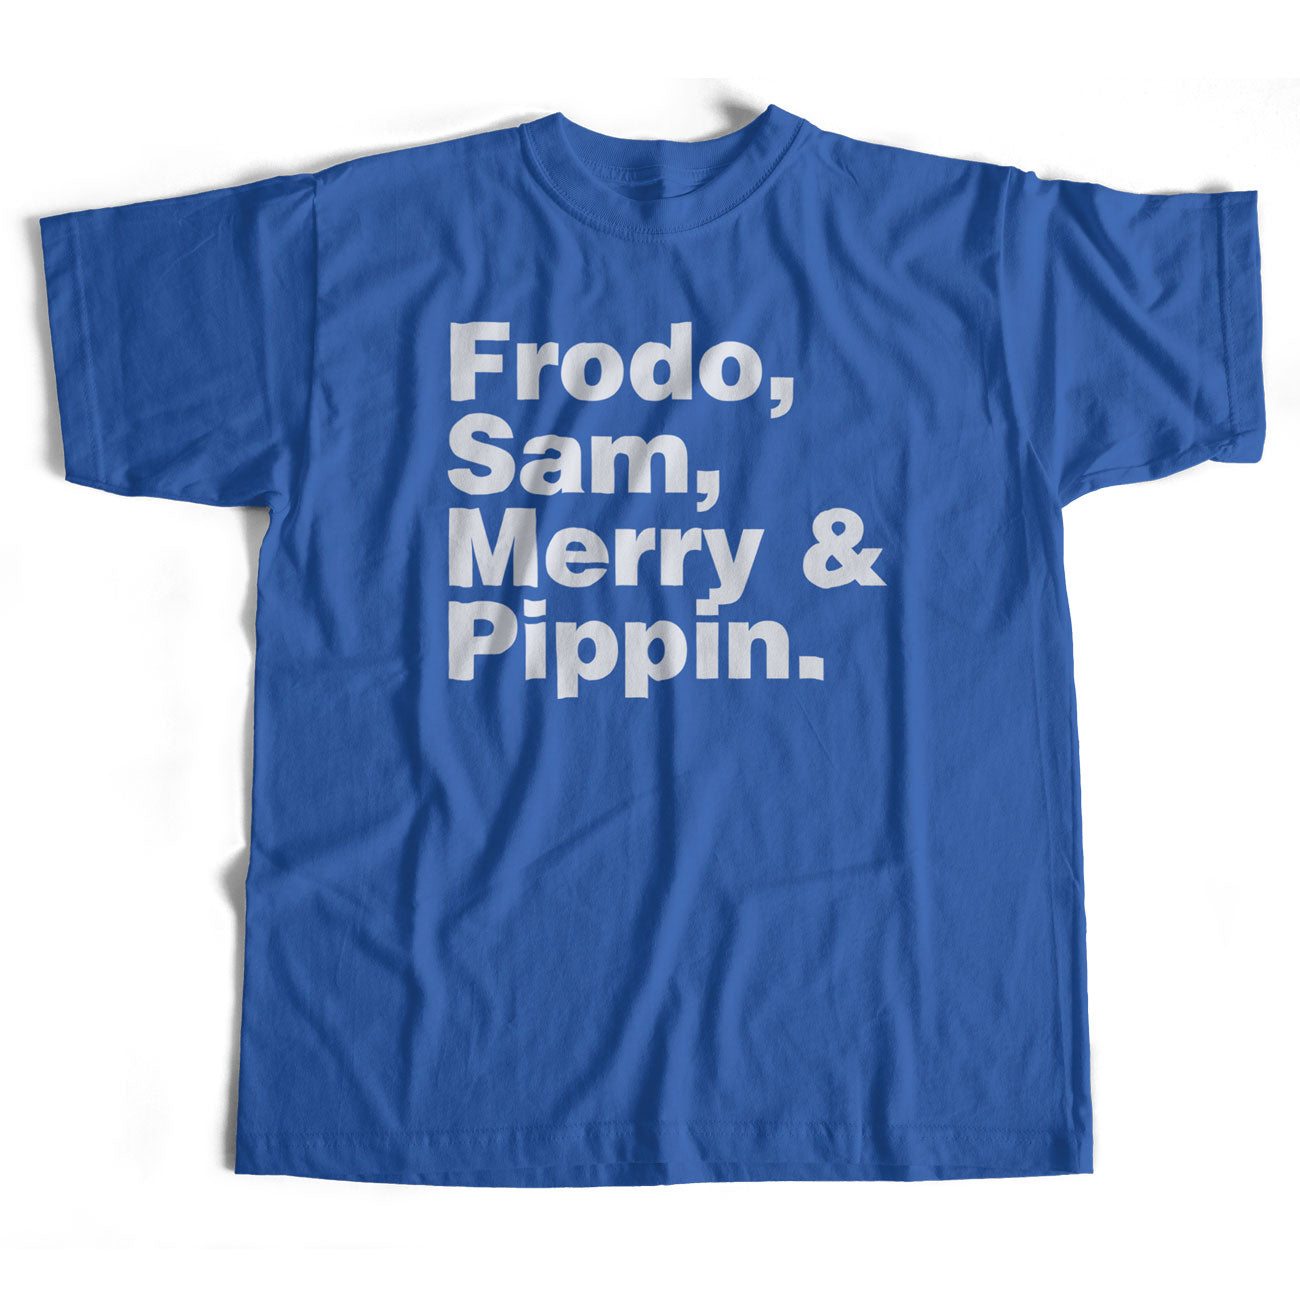 Frodo, Sam, Merry & Pippin Names T shirt for Lord Of The Rings afficionados